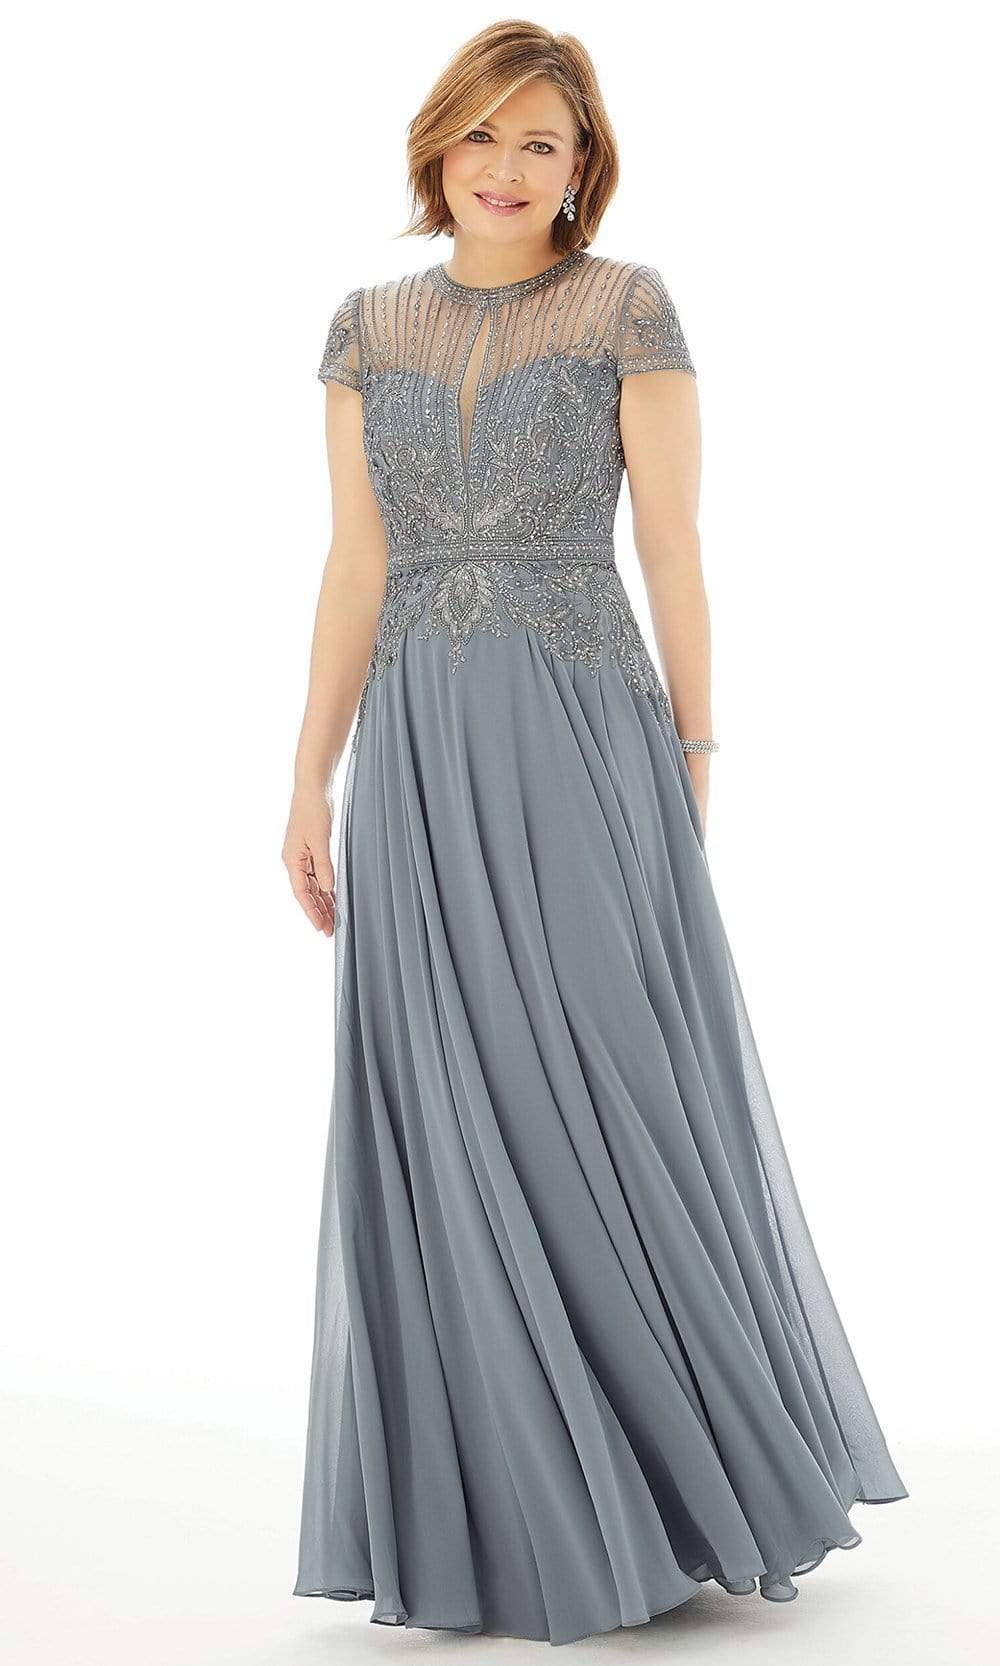 Image of MGNY By Mori Lee - 72221 Beaded Embroidery Illusion Neck Chiffon Gown